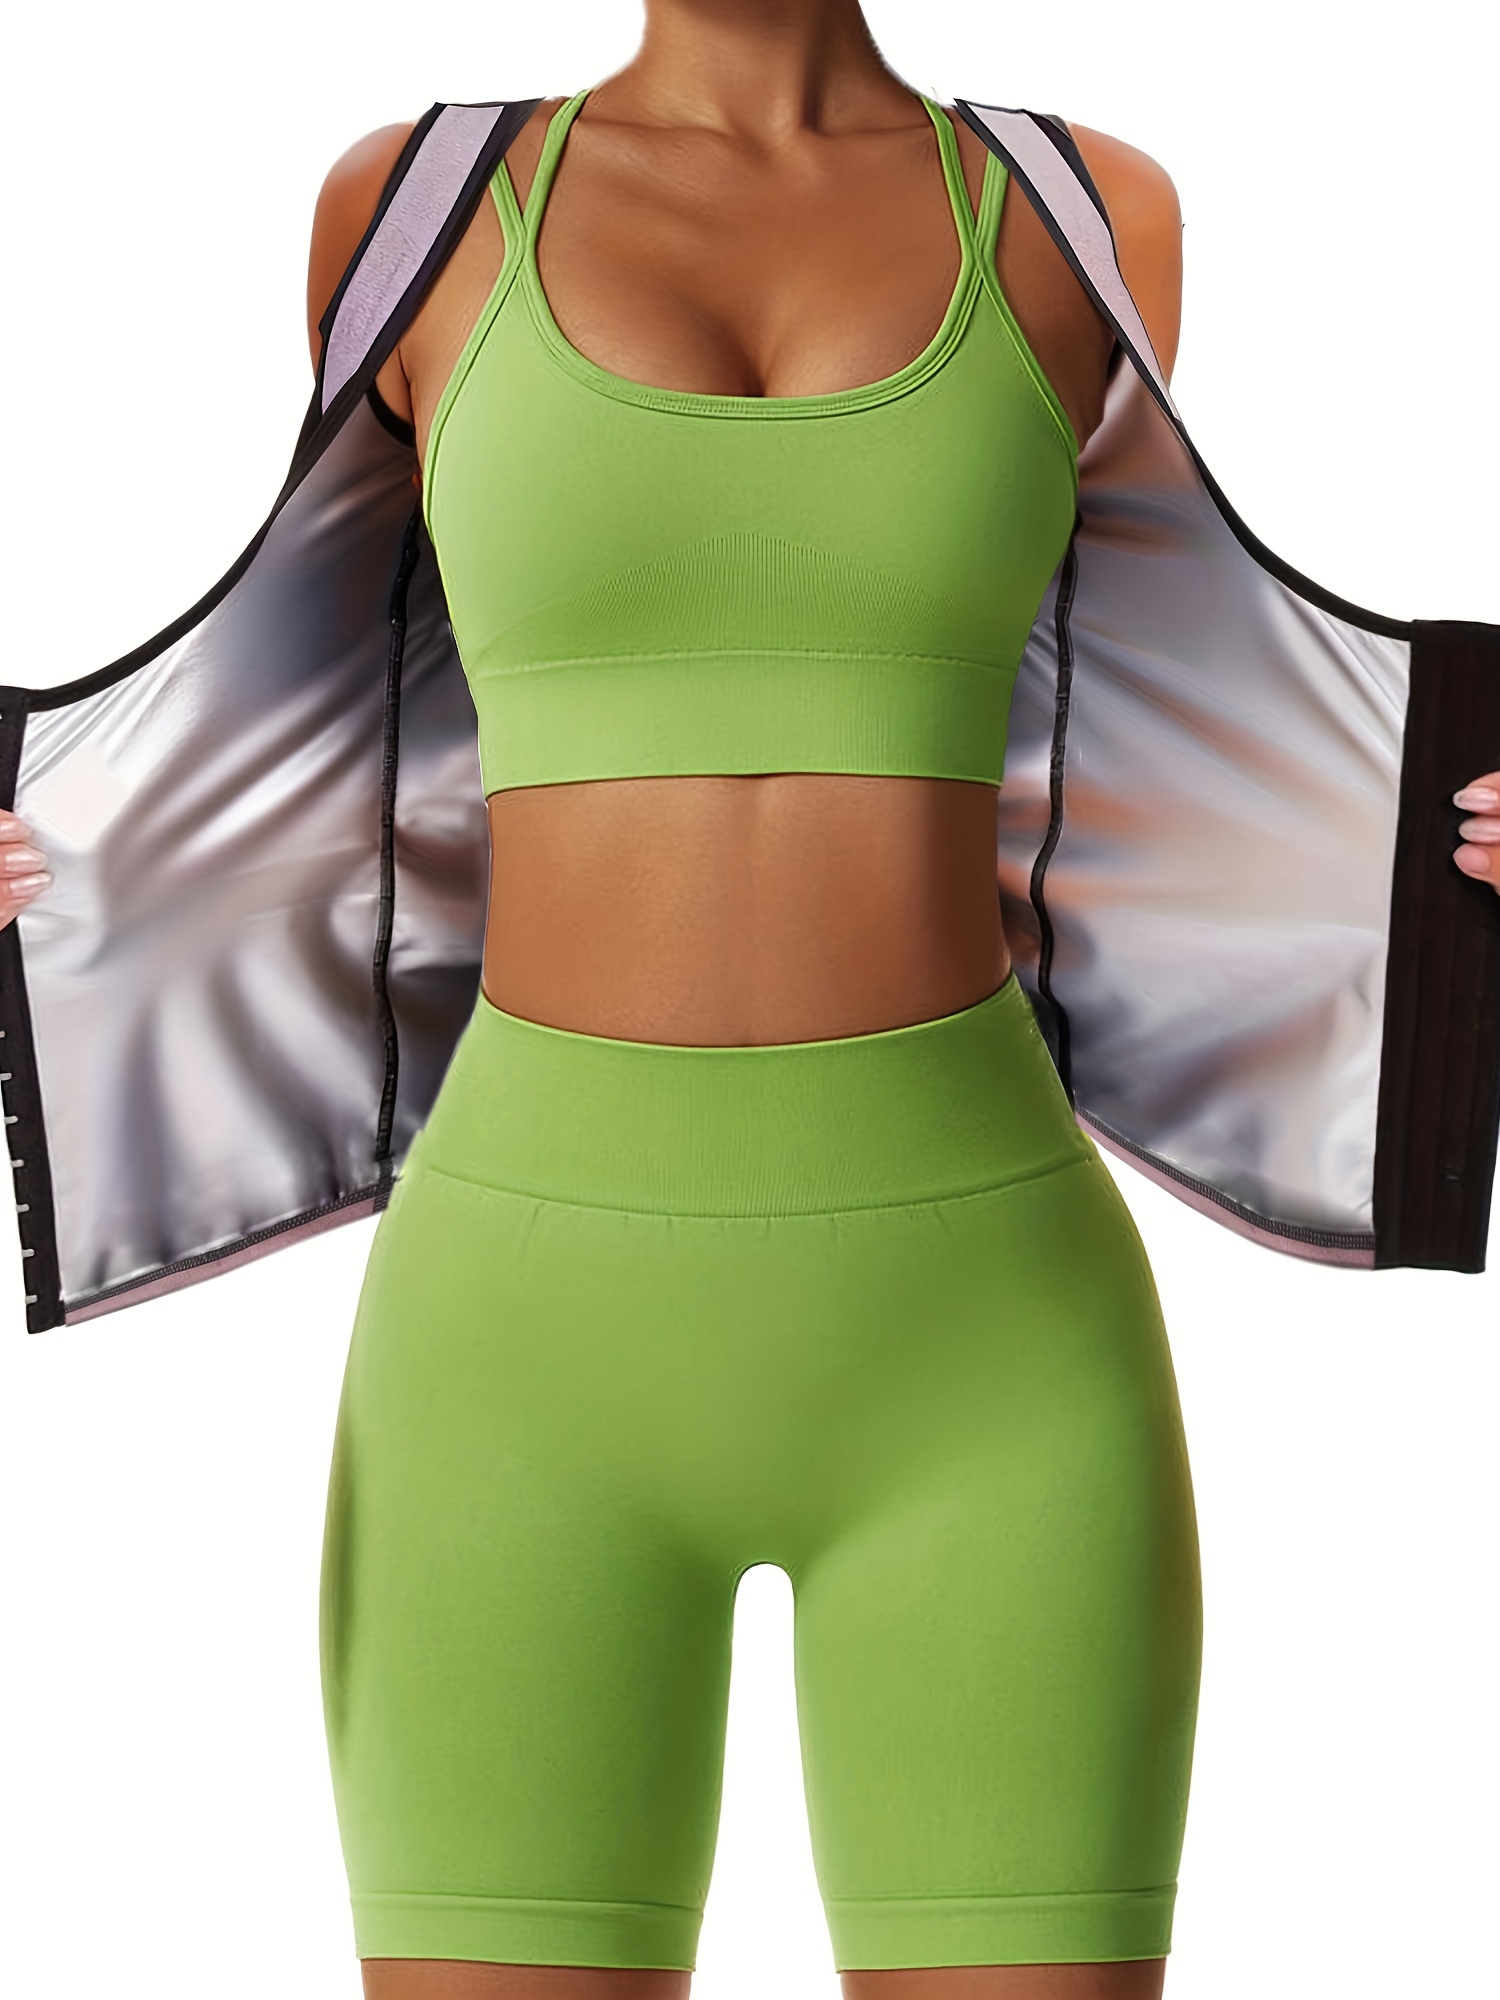 Womens Thermo Sweat Sauna Klopp Shaper Vest Waist Trainer Corset For  Slimming And Fitness Zipper Shirt H1018 From Sihuai10, $10.52